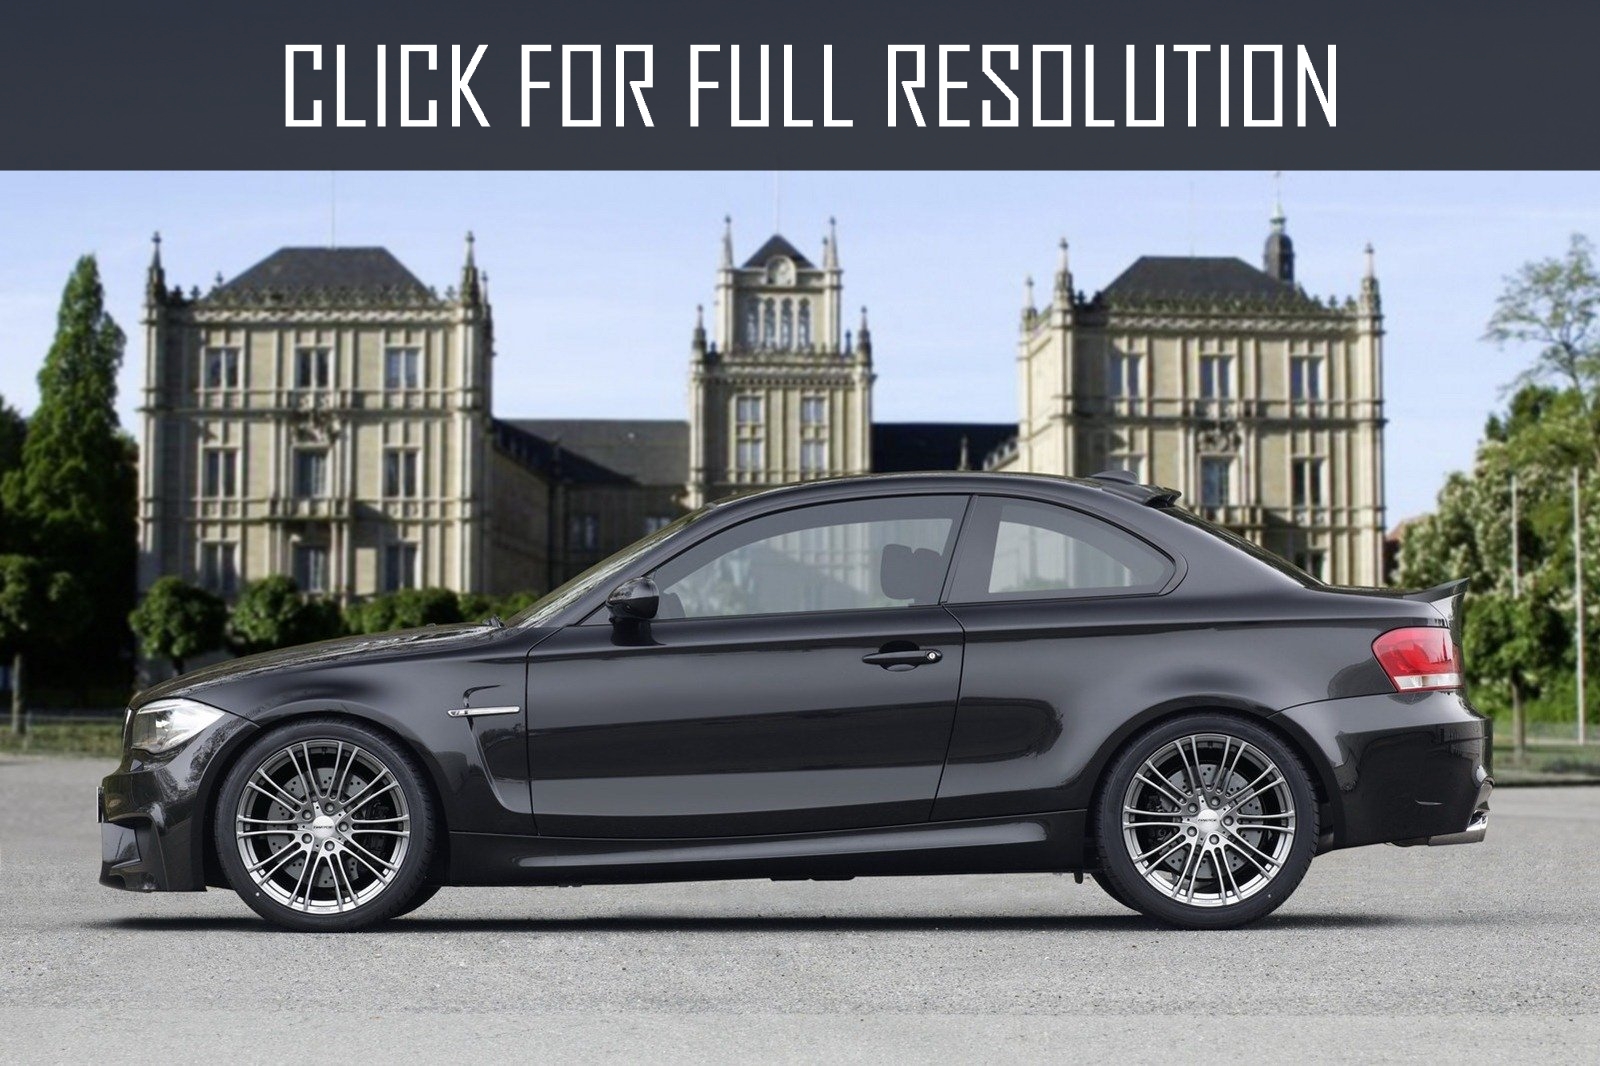 2012 Bmw 1 Series Coupe